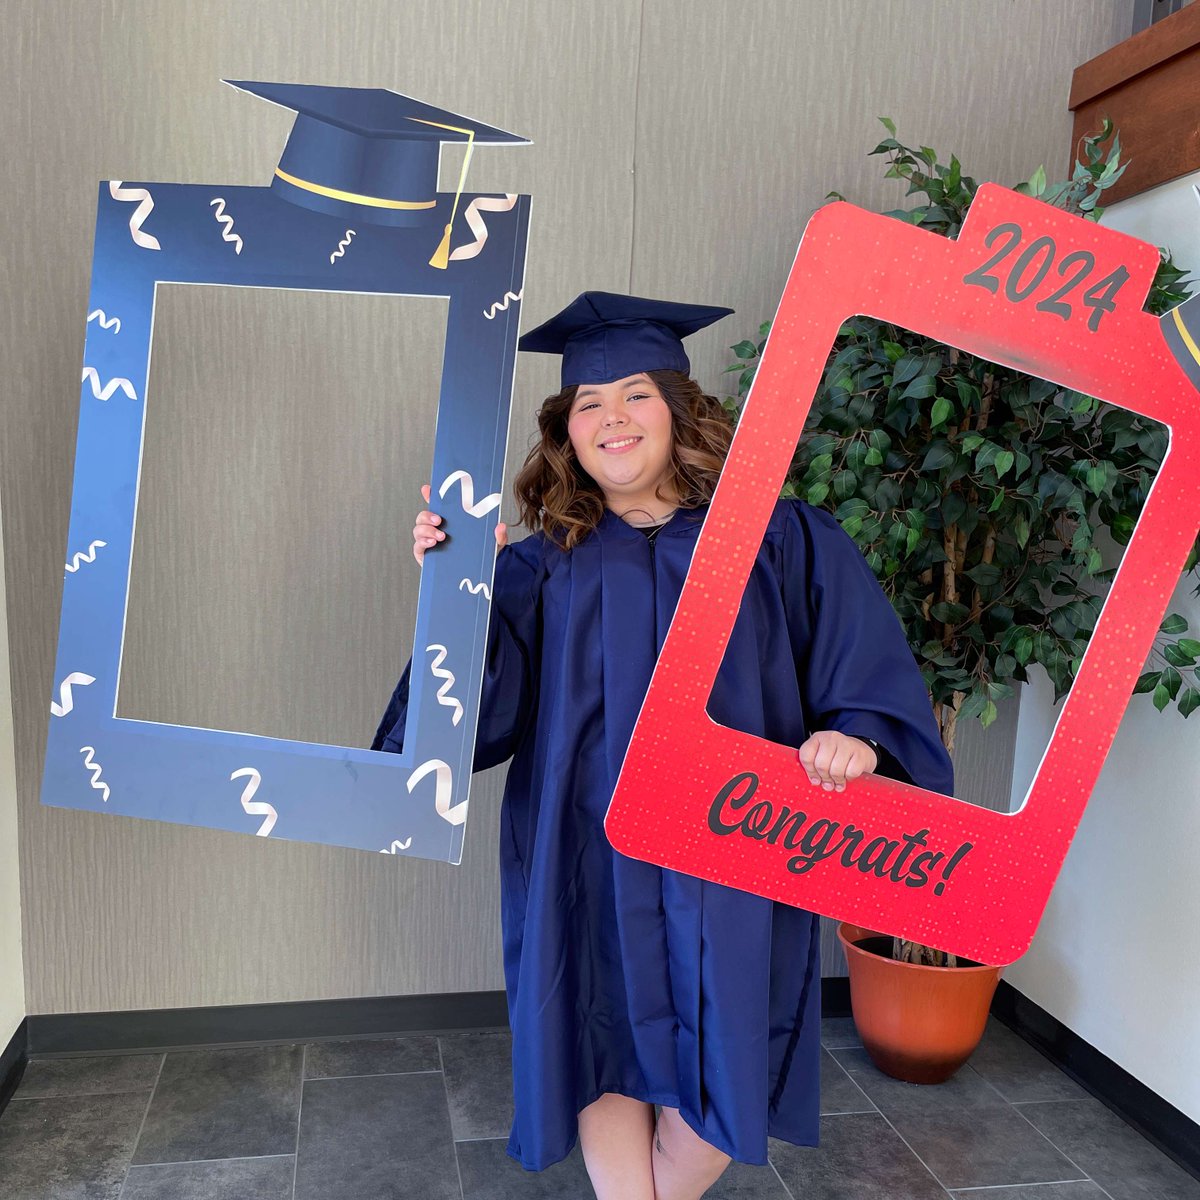 🎓📸 Celebrate graduation day with our photo boards at Nisqually Post & Print! 🌟✨ Strike a pose and cherish the moment! 🎉📷 #GradPhotos #NisquallyPostAndPrint